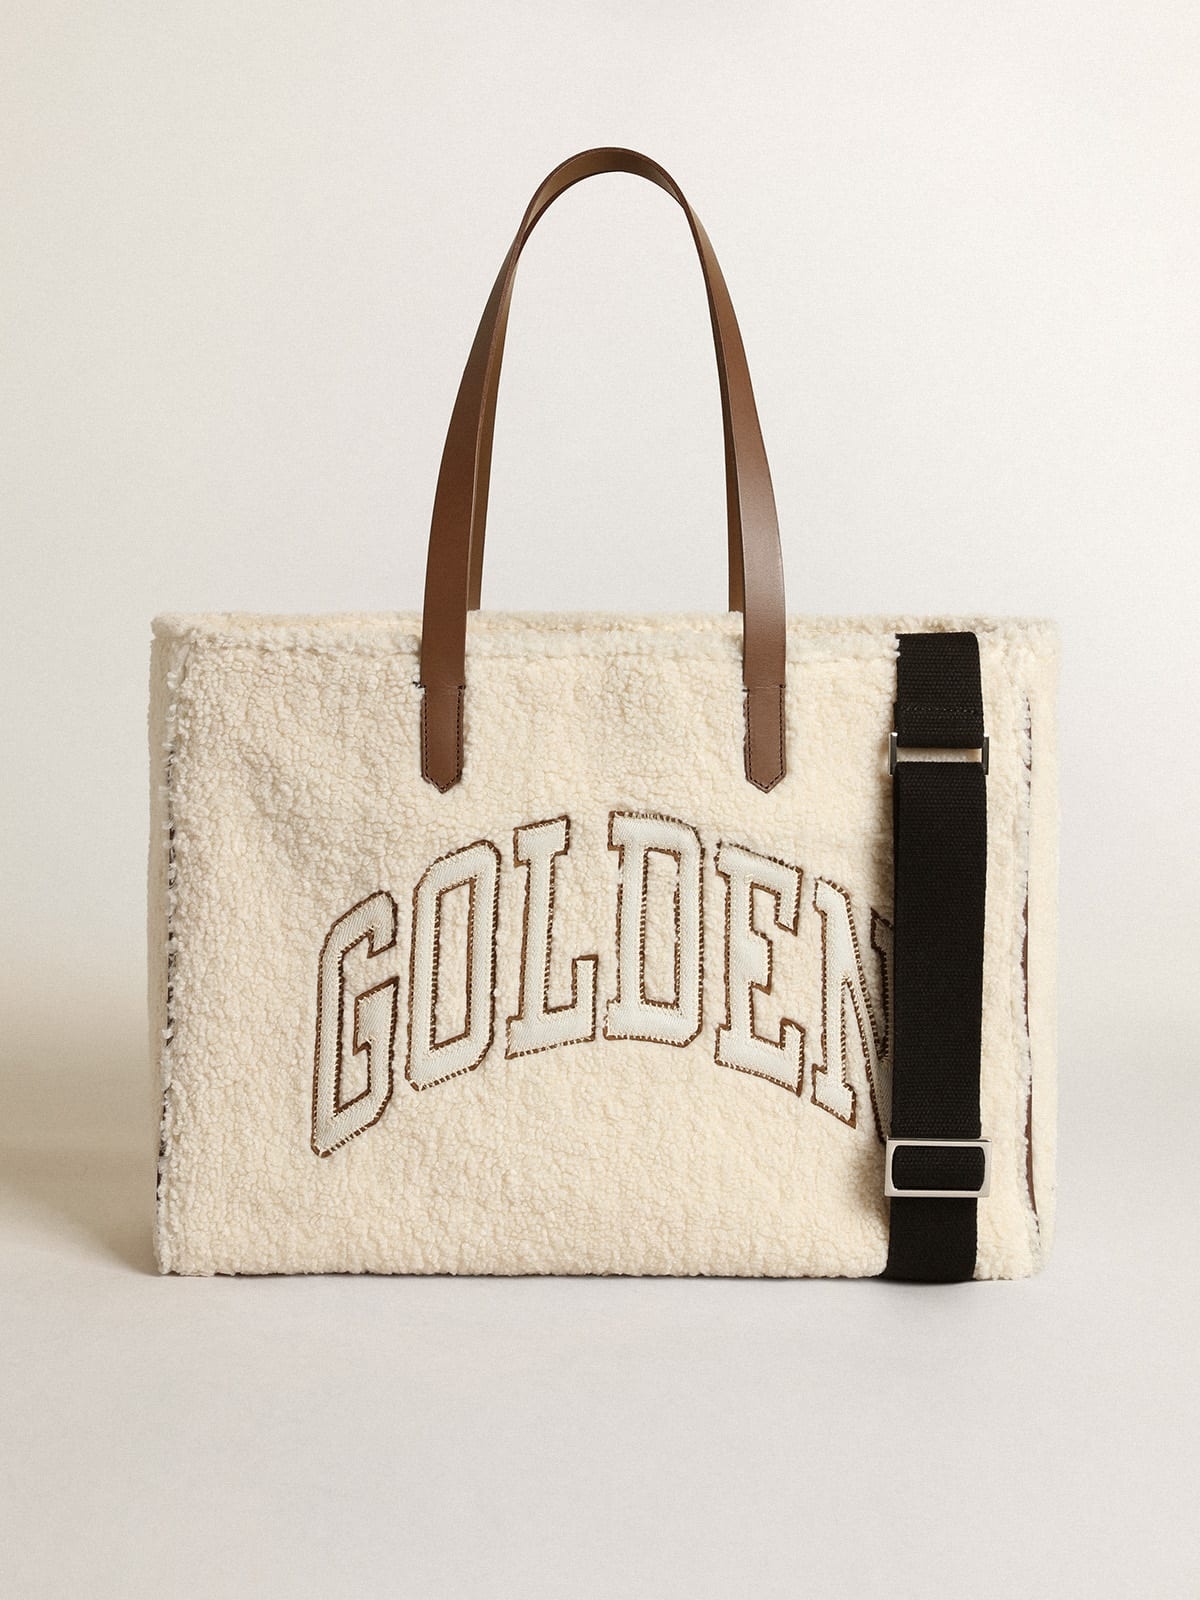 East-West California Bag in white faux fur with Golden lettering and contrasting handles - 2